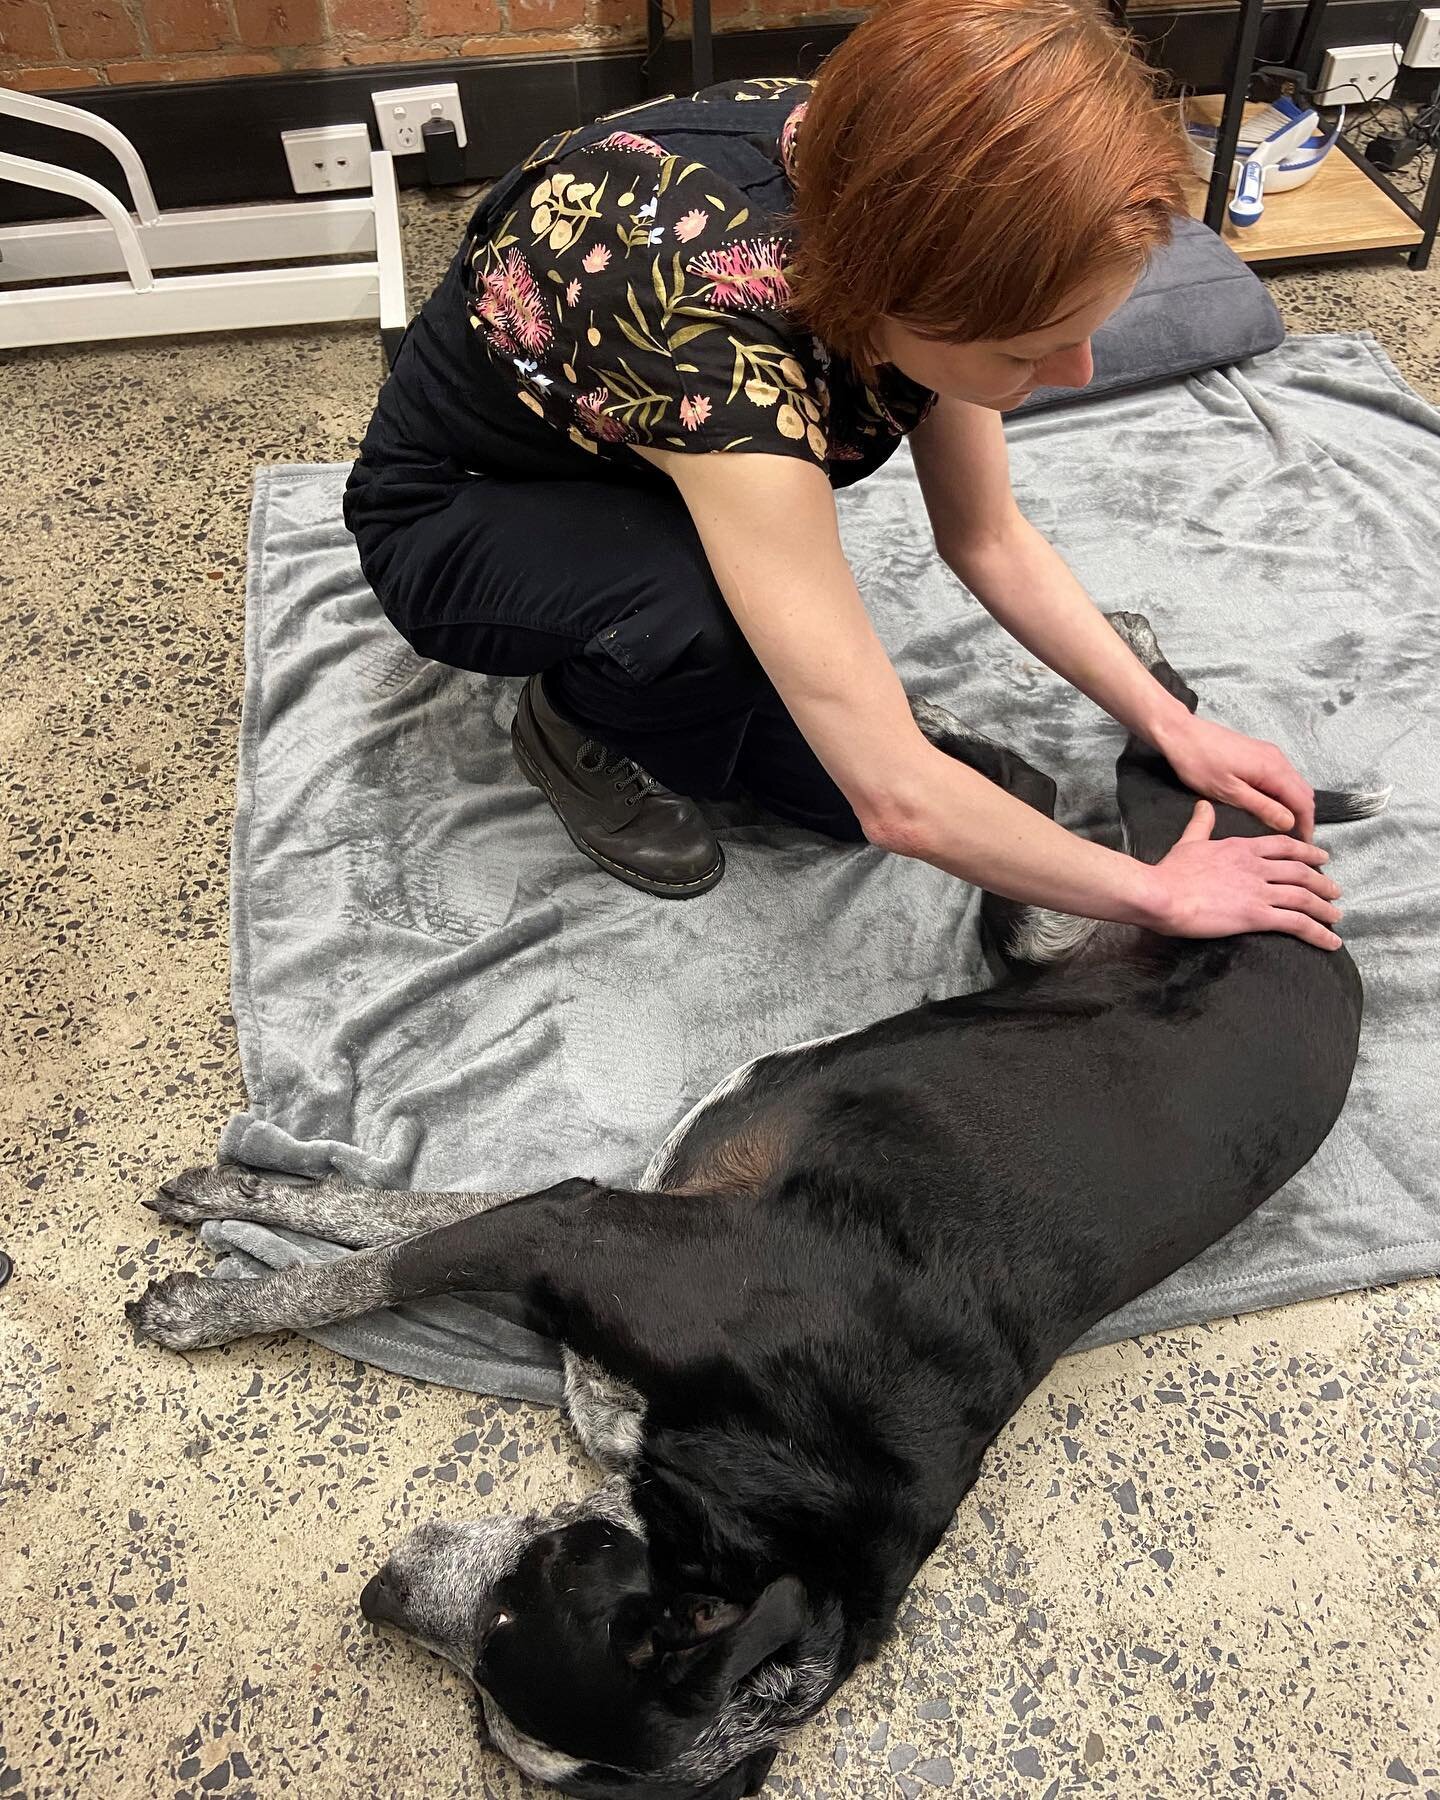 Albie has been suffering from lower back pain. Albie&rsquo;s owner booked in an appointment with Dr Lucie for a myotherapy session. Working her magical hands she expects Albie to experience some relief soon. We think next time he might even fall asle